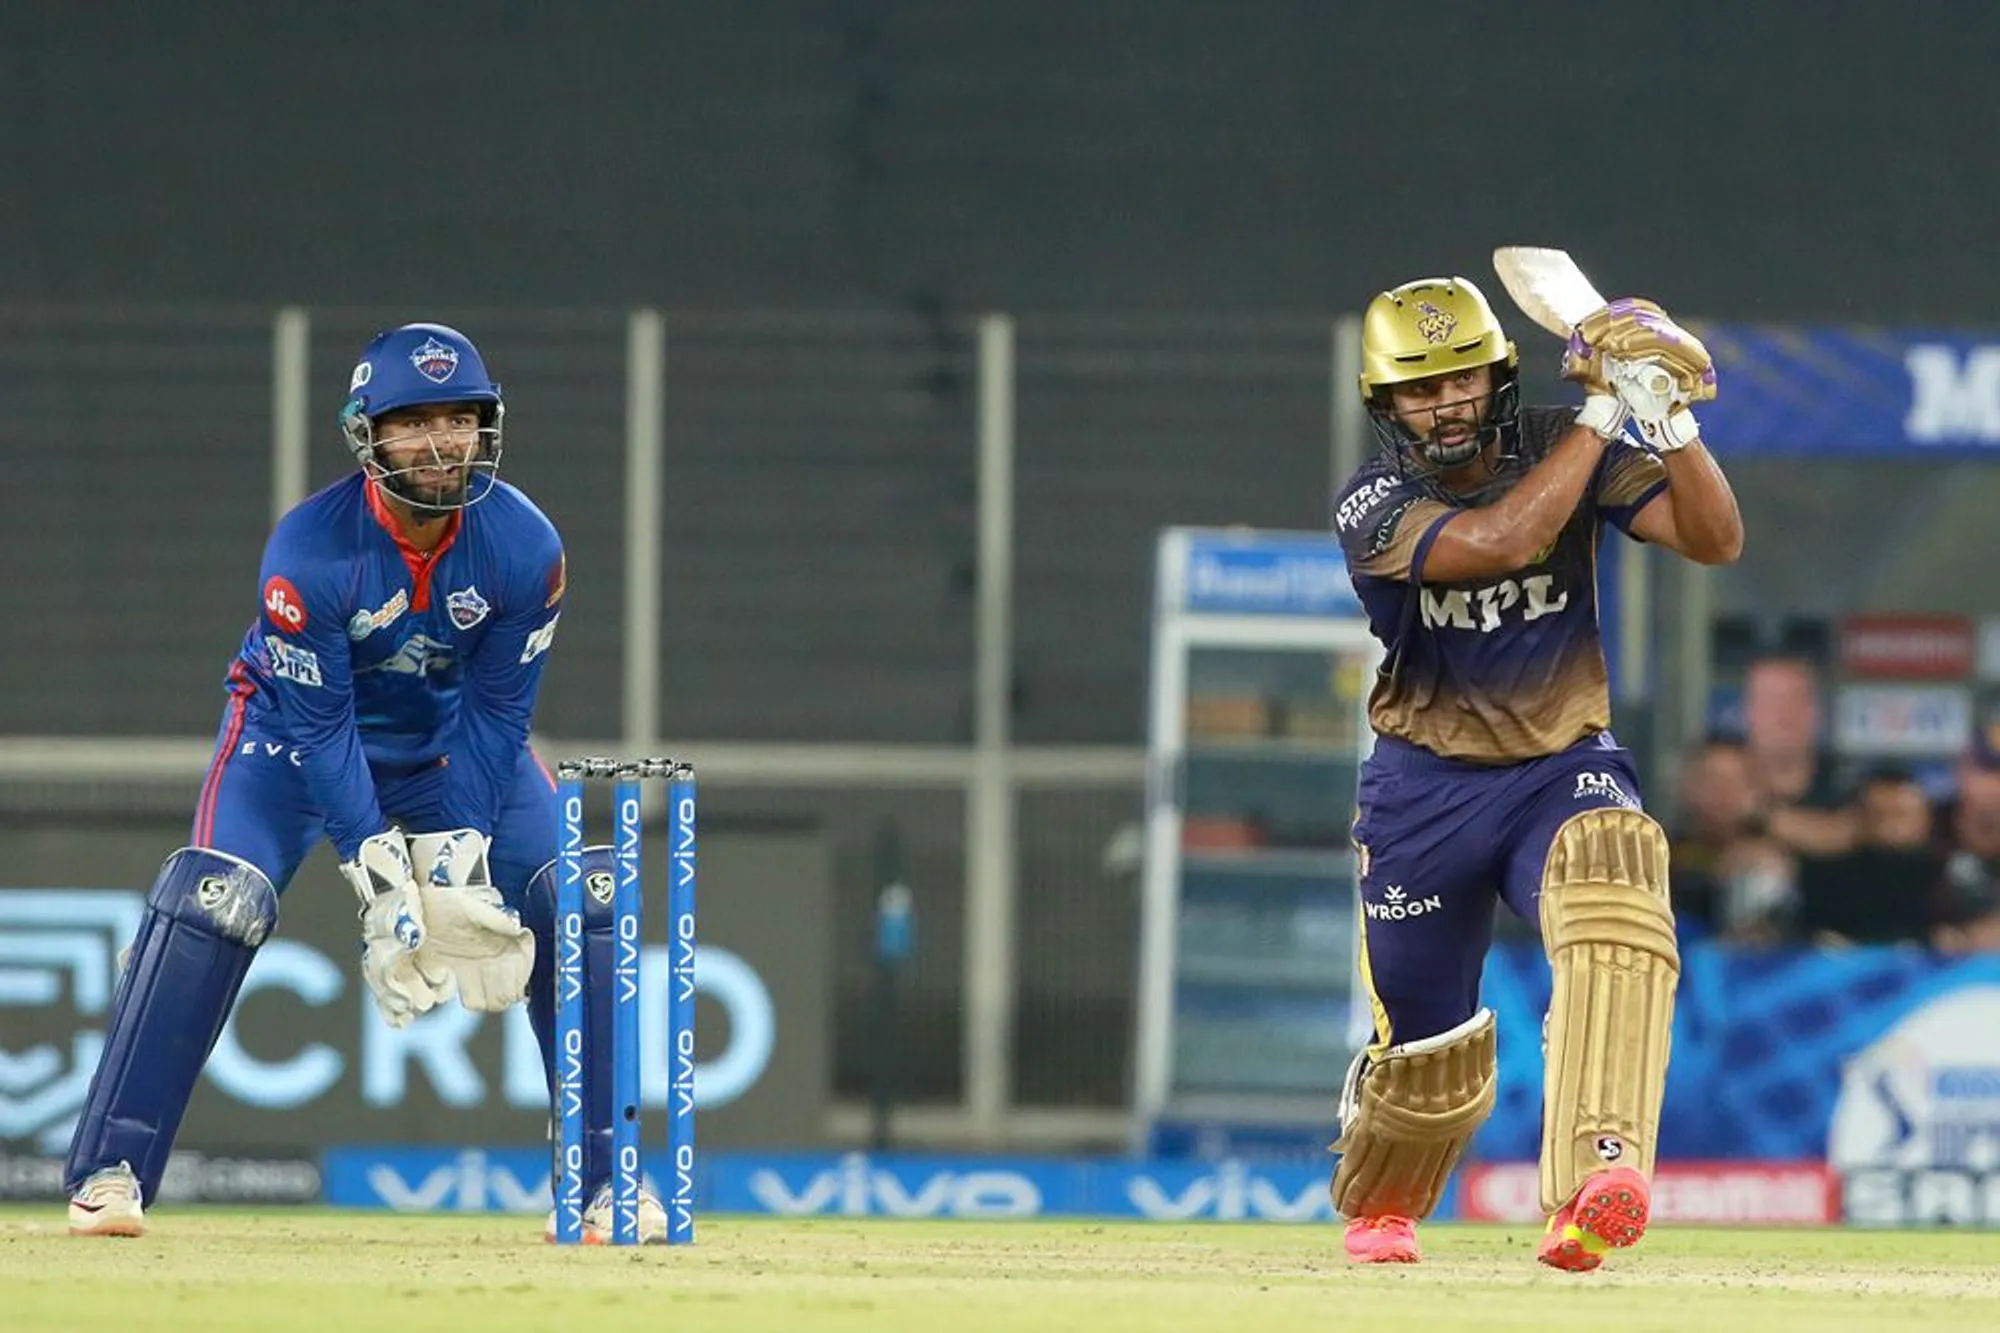 IPL 2021 | KKR vs DC: Refreshed Knight Riders search turnaround, in-form Delhi seek consolidation